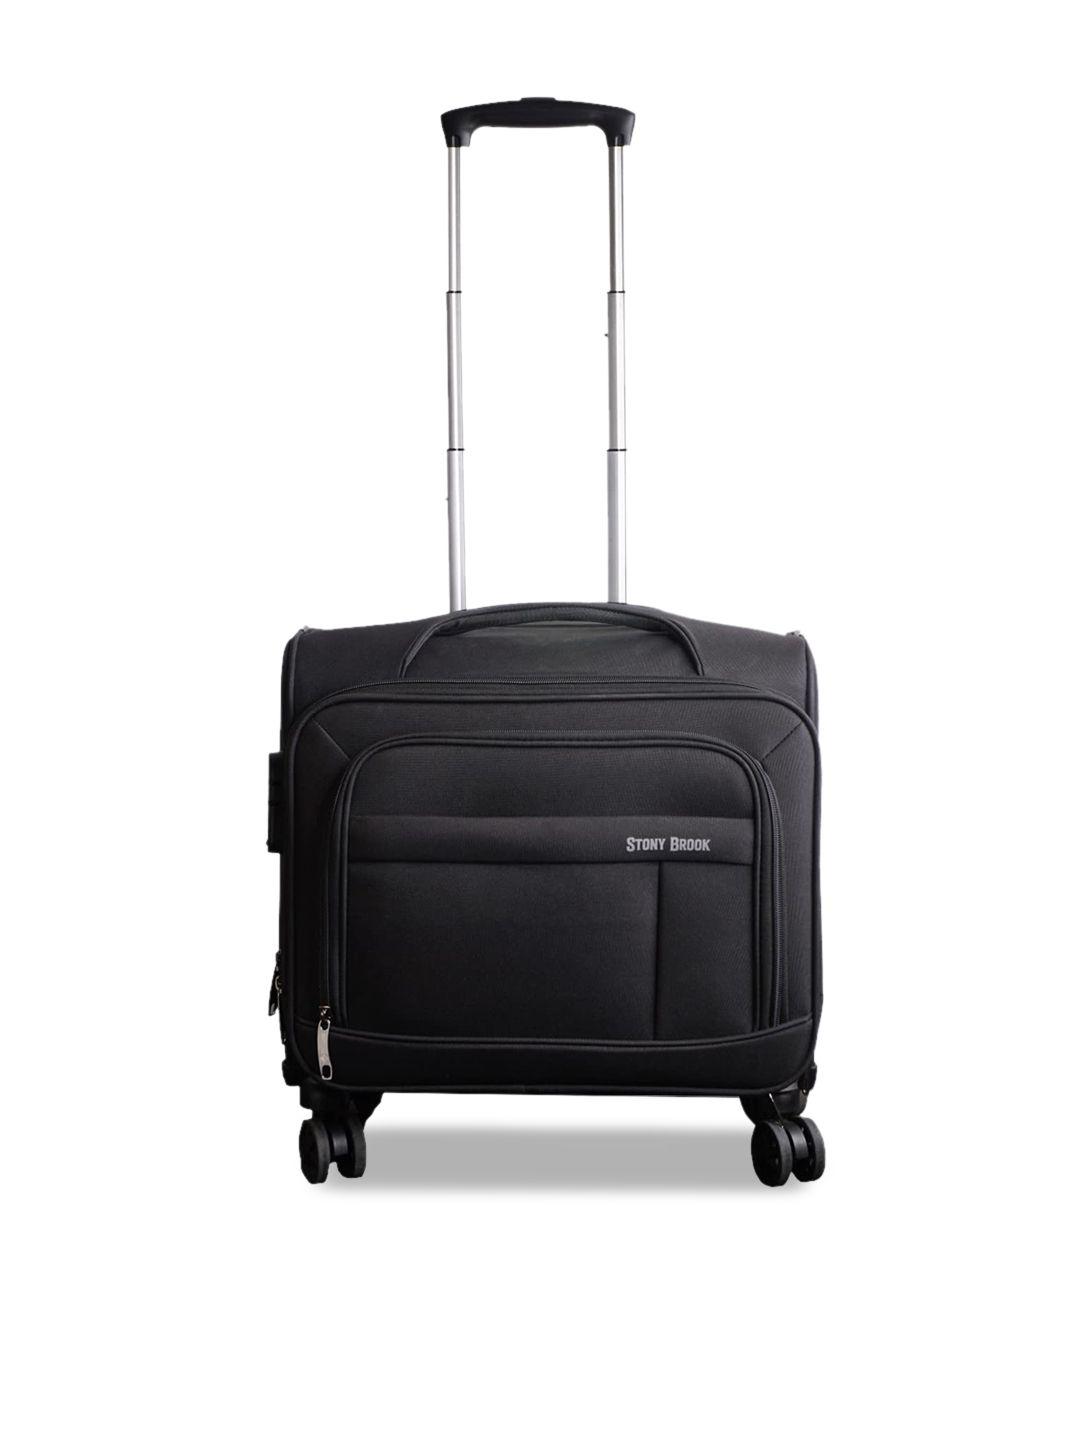 stony brook by nasher miles soft-sided small laptop roller suitcase